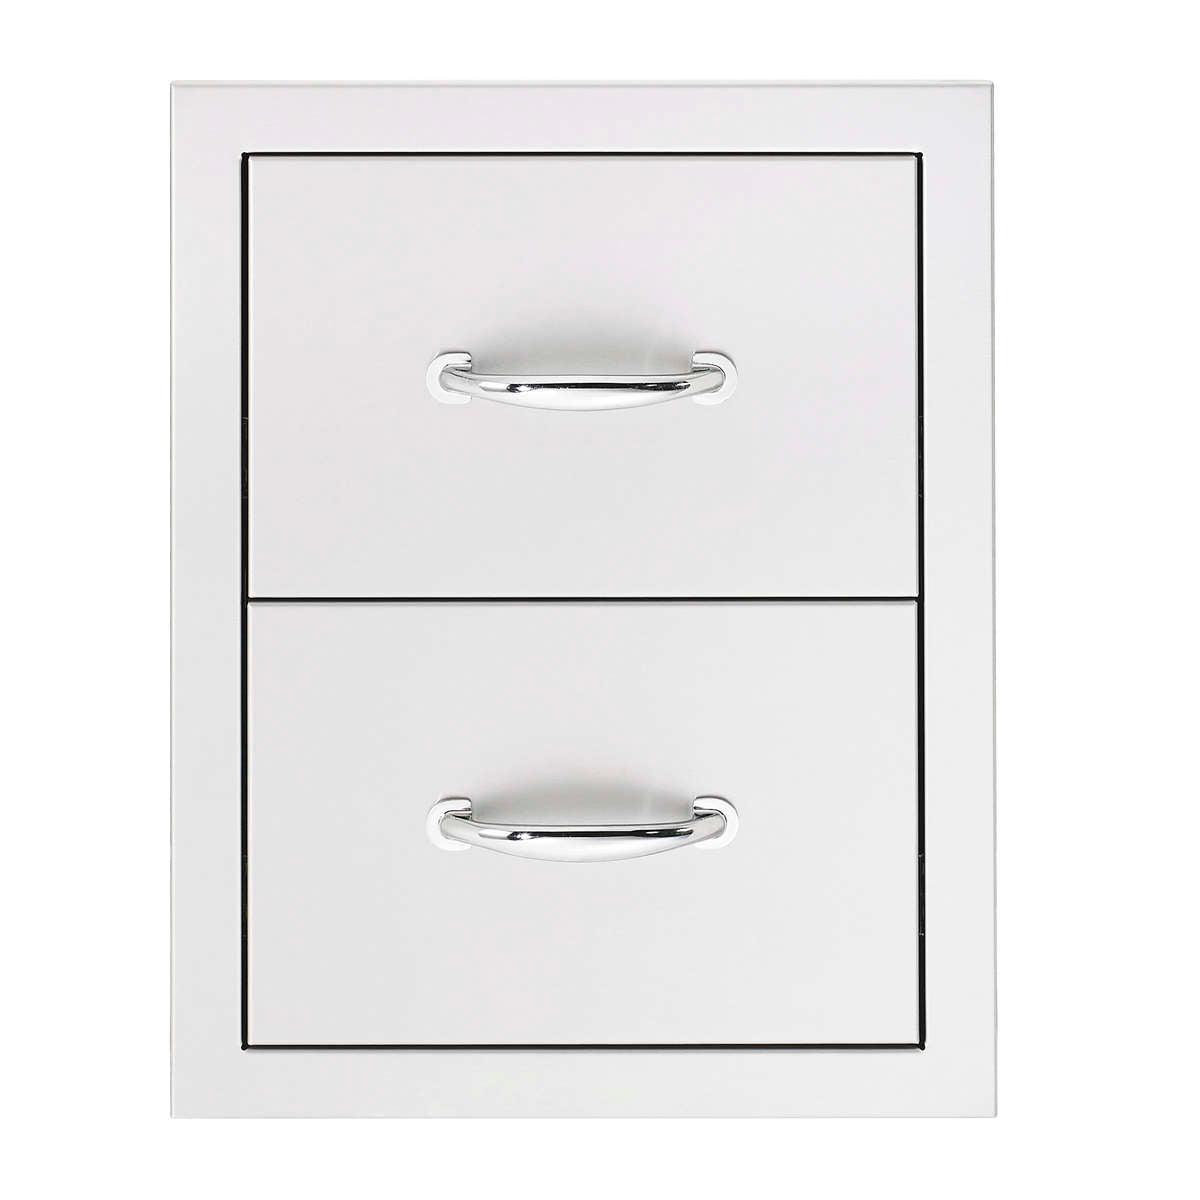 Stainless Steel Drawers